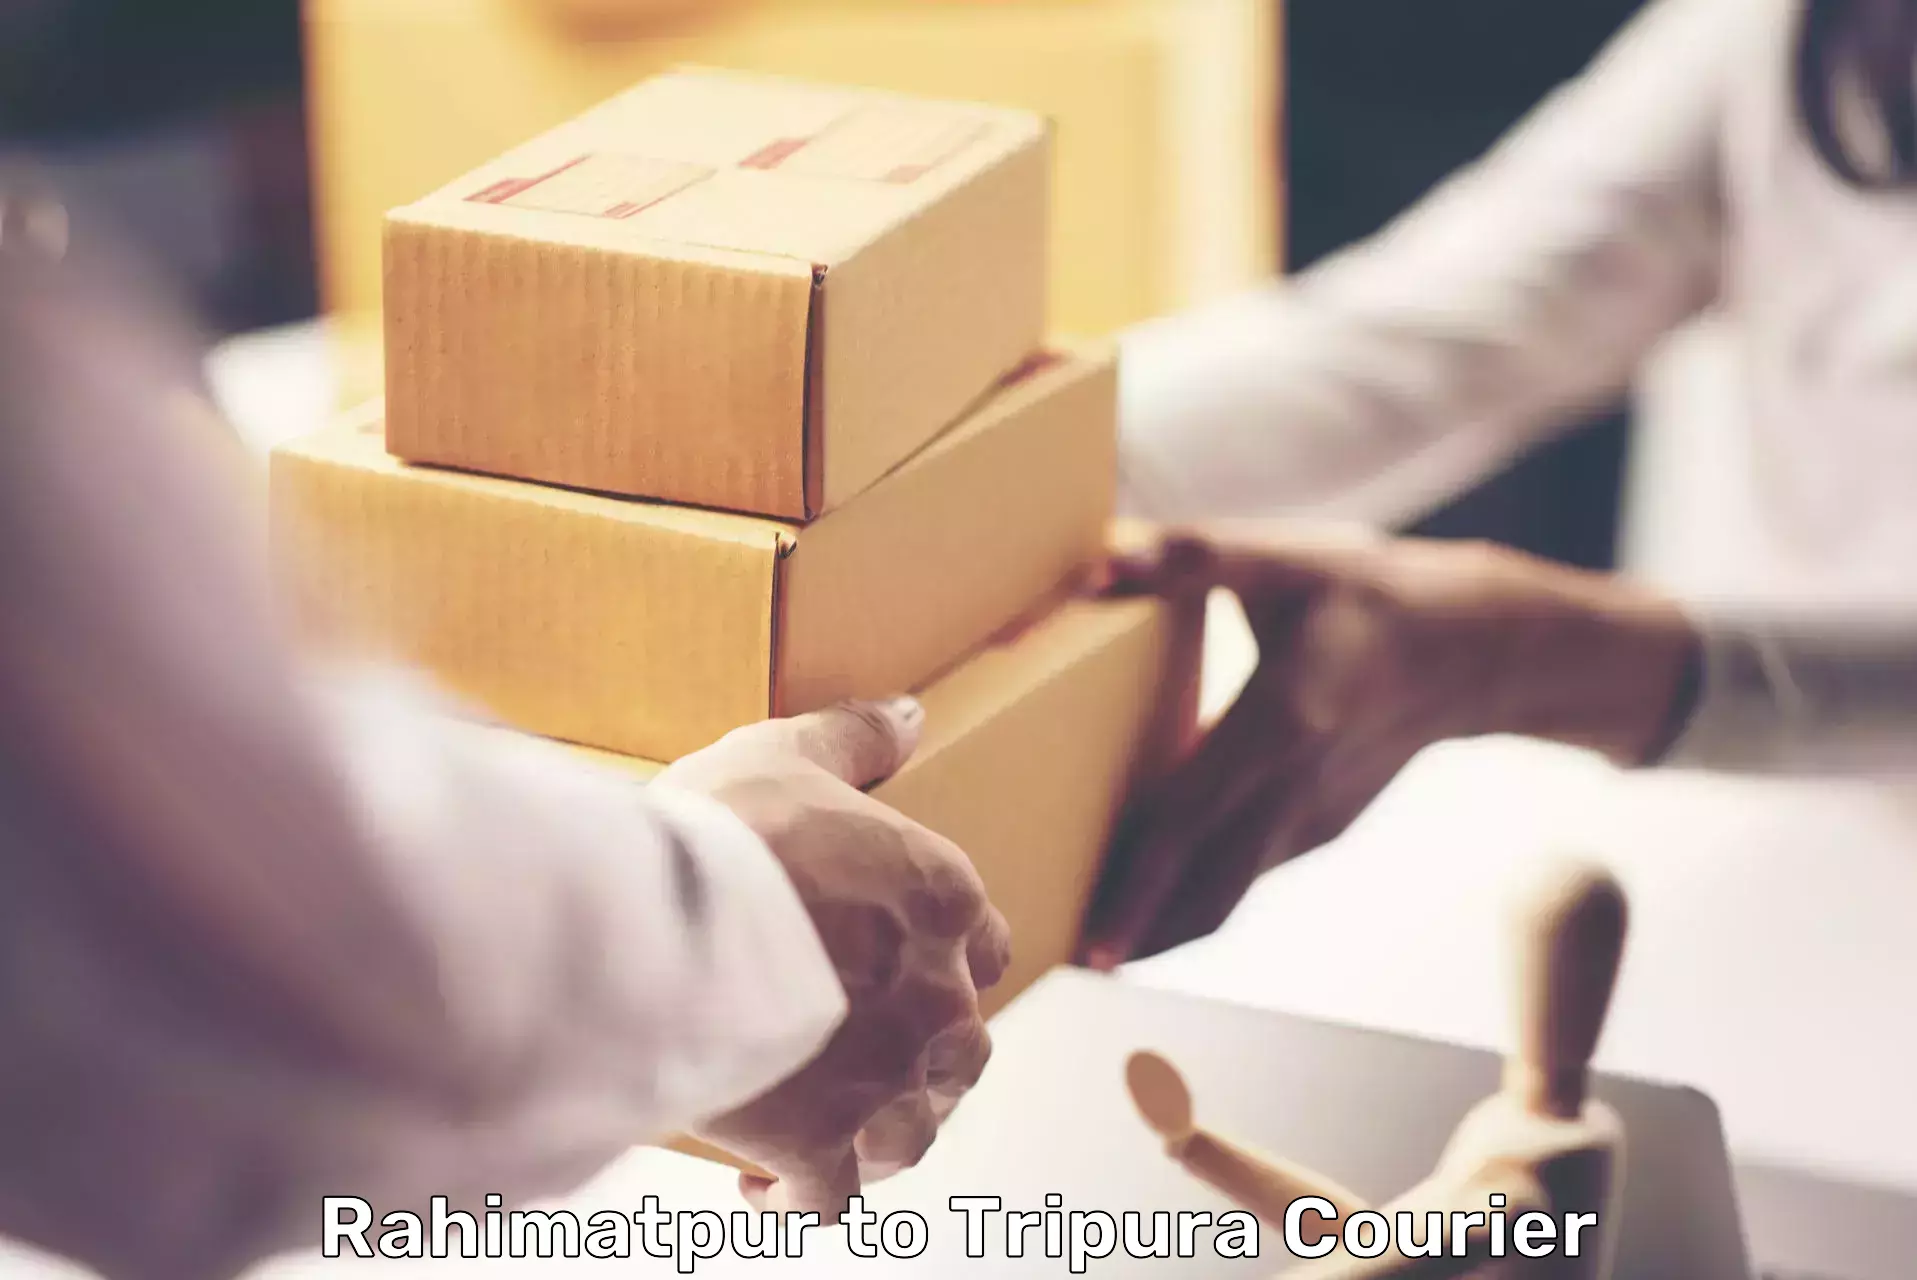 Global shipping networks in Rahimatpur to Dhalai